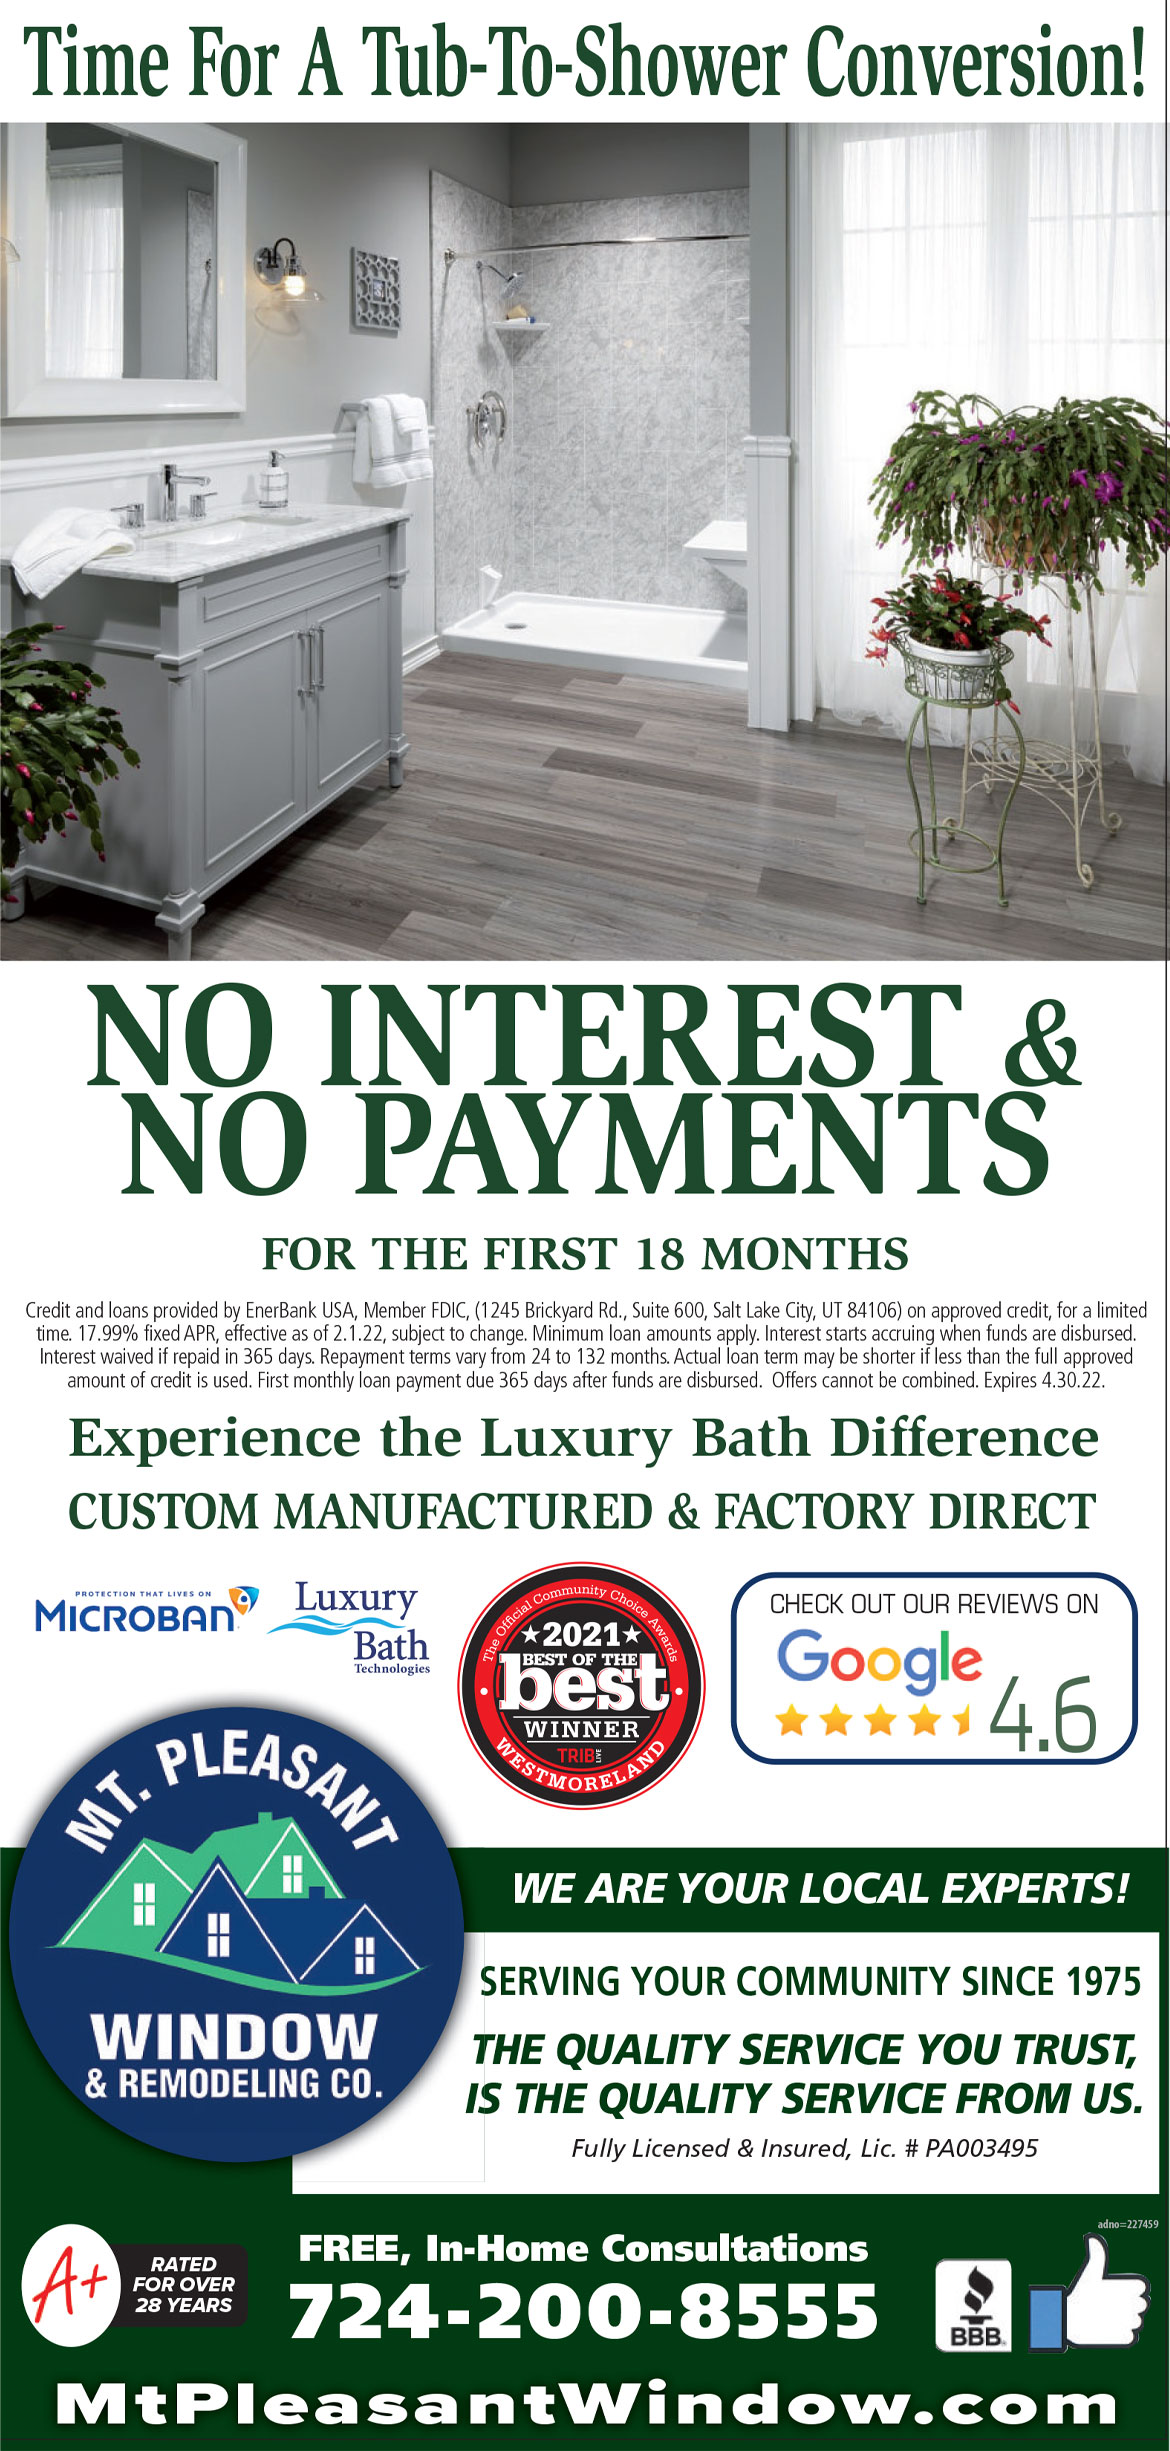 No Interest & No Payments for the First 18 Months